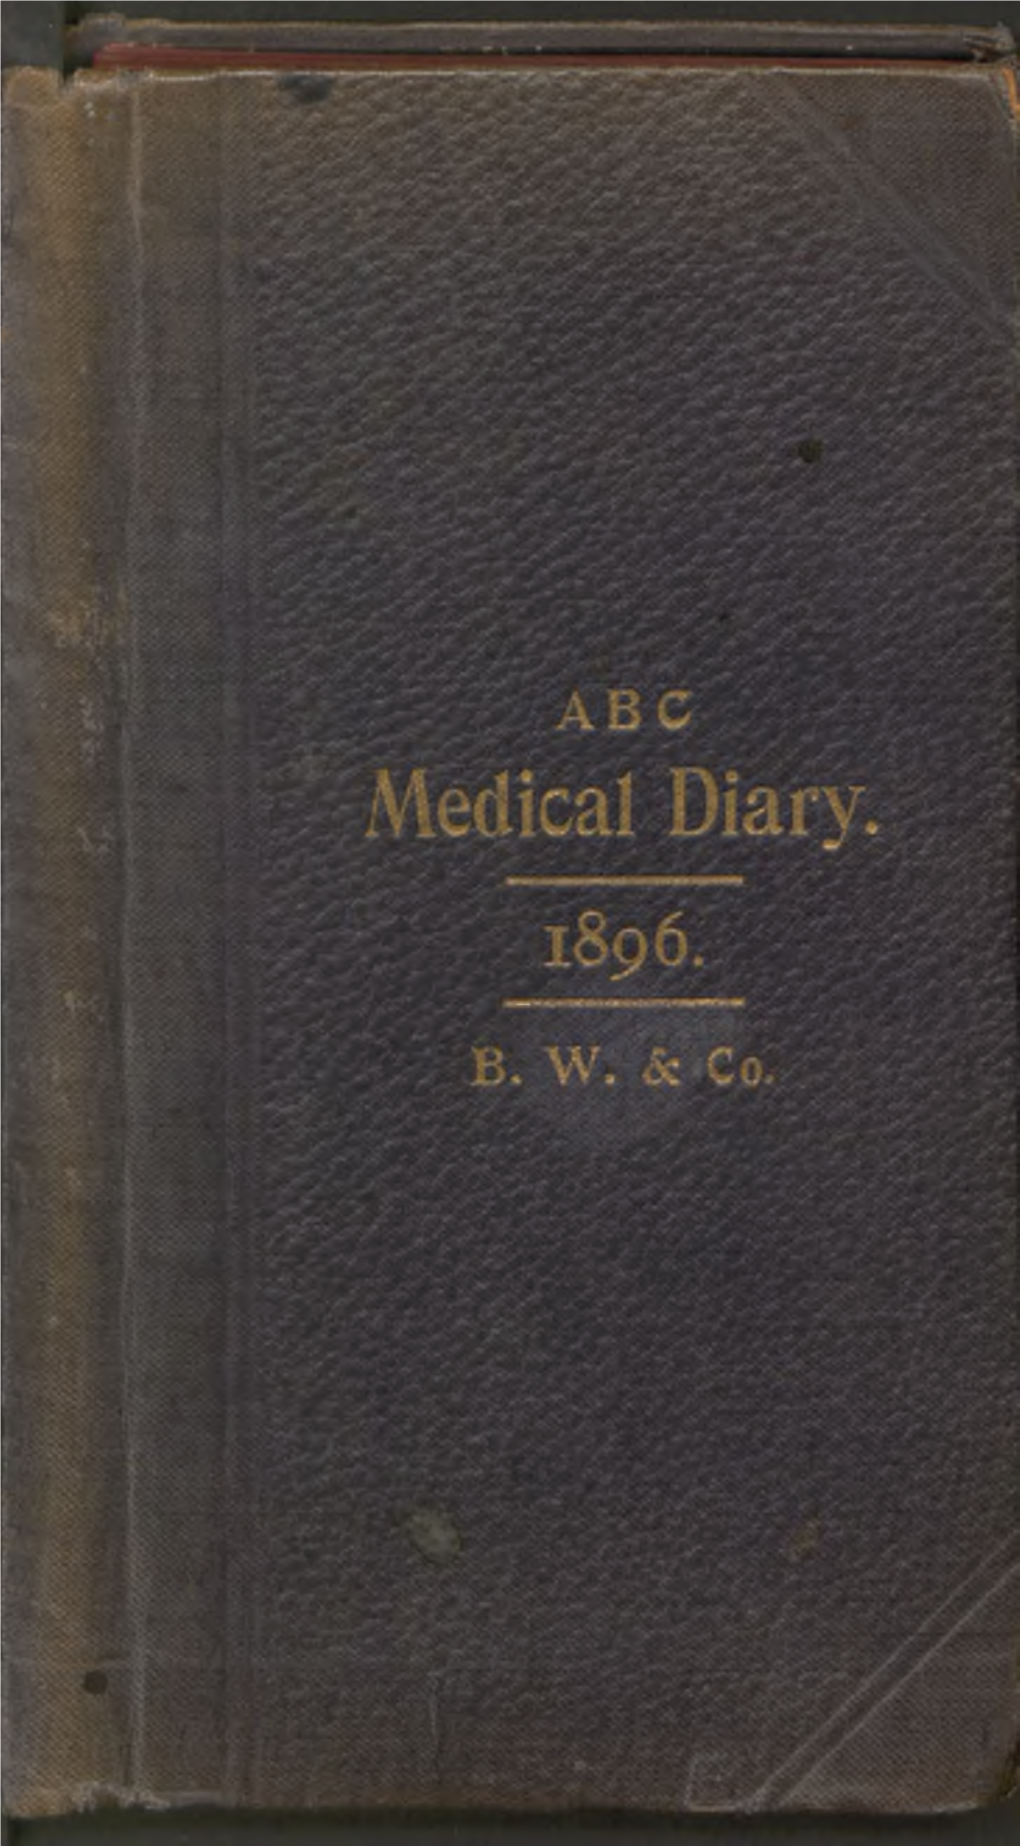 The ABC Medical Diary and Visiting List